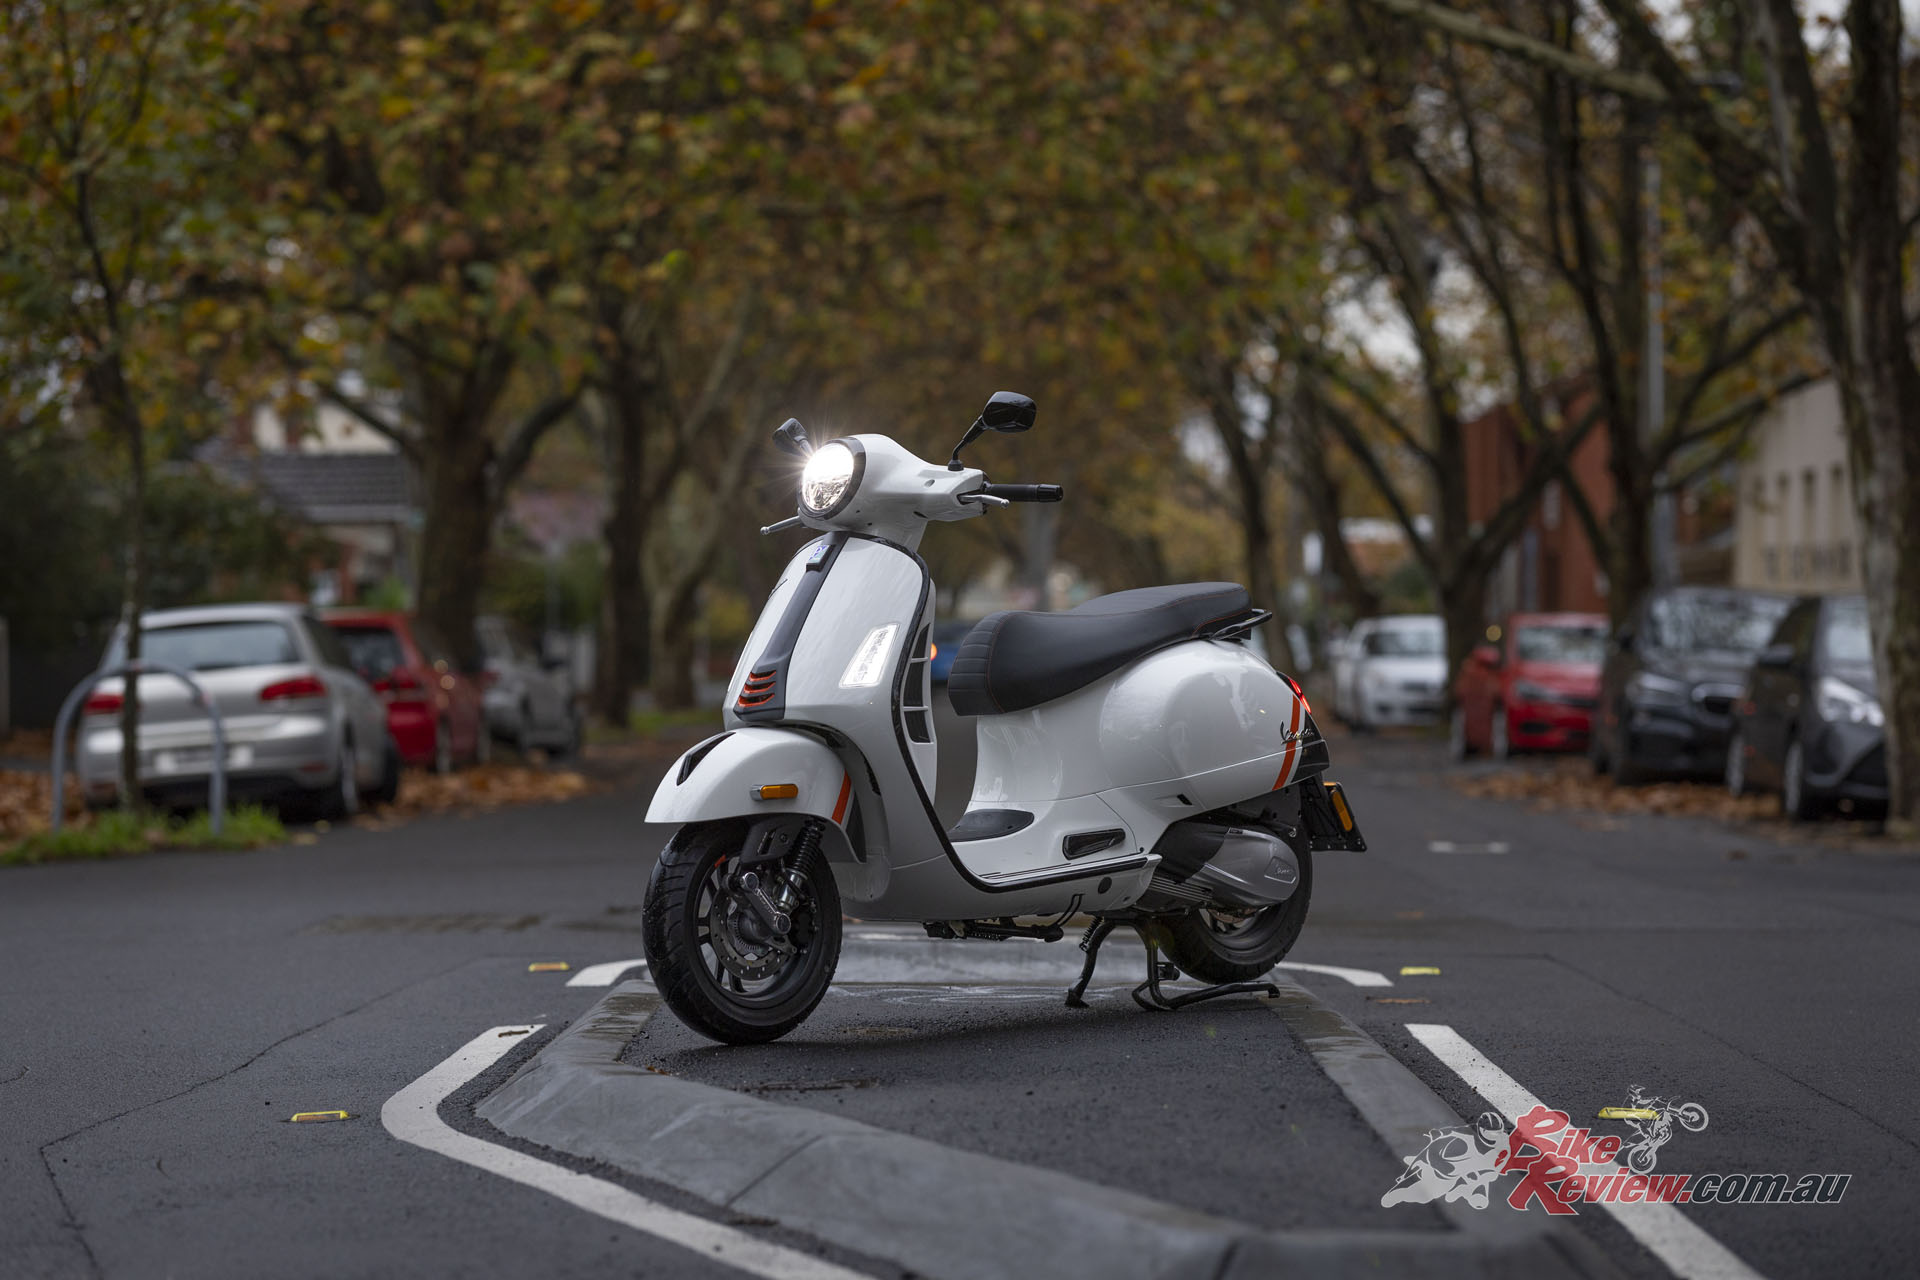 These little machines do carry a price tag for that Vespa badge, you get a cool looking scooter and easy rideability for your money though.